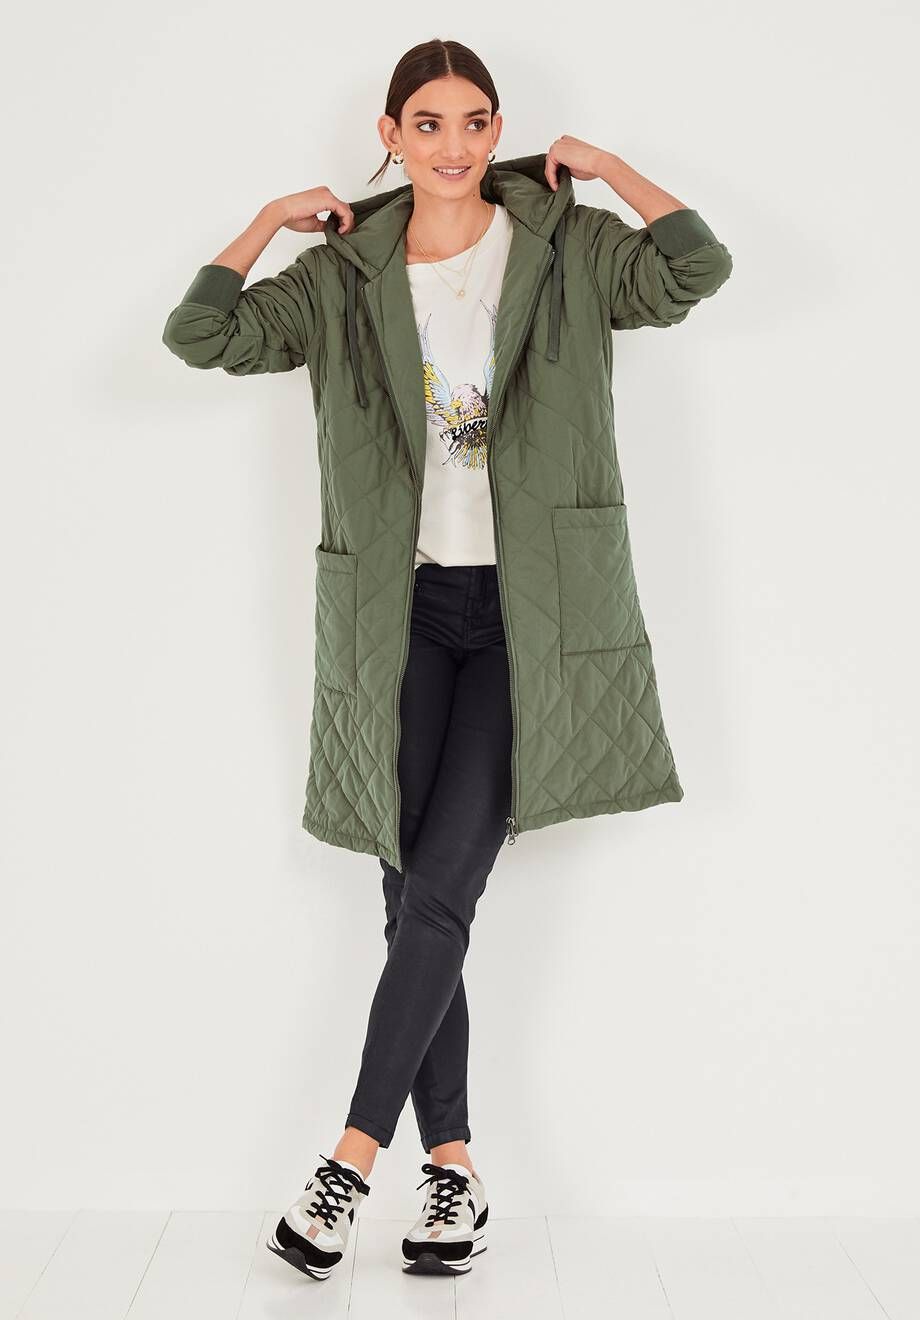 smart quilted jackets ladies